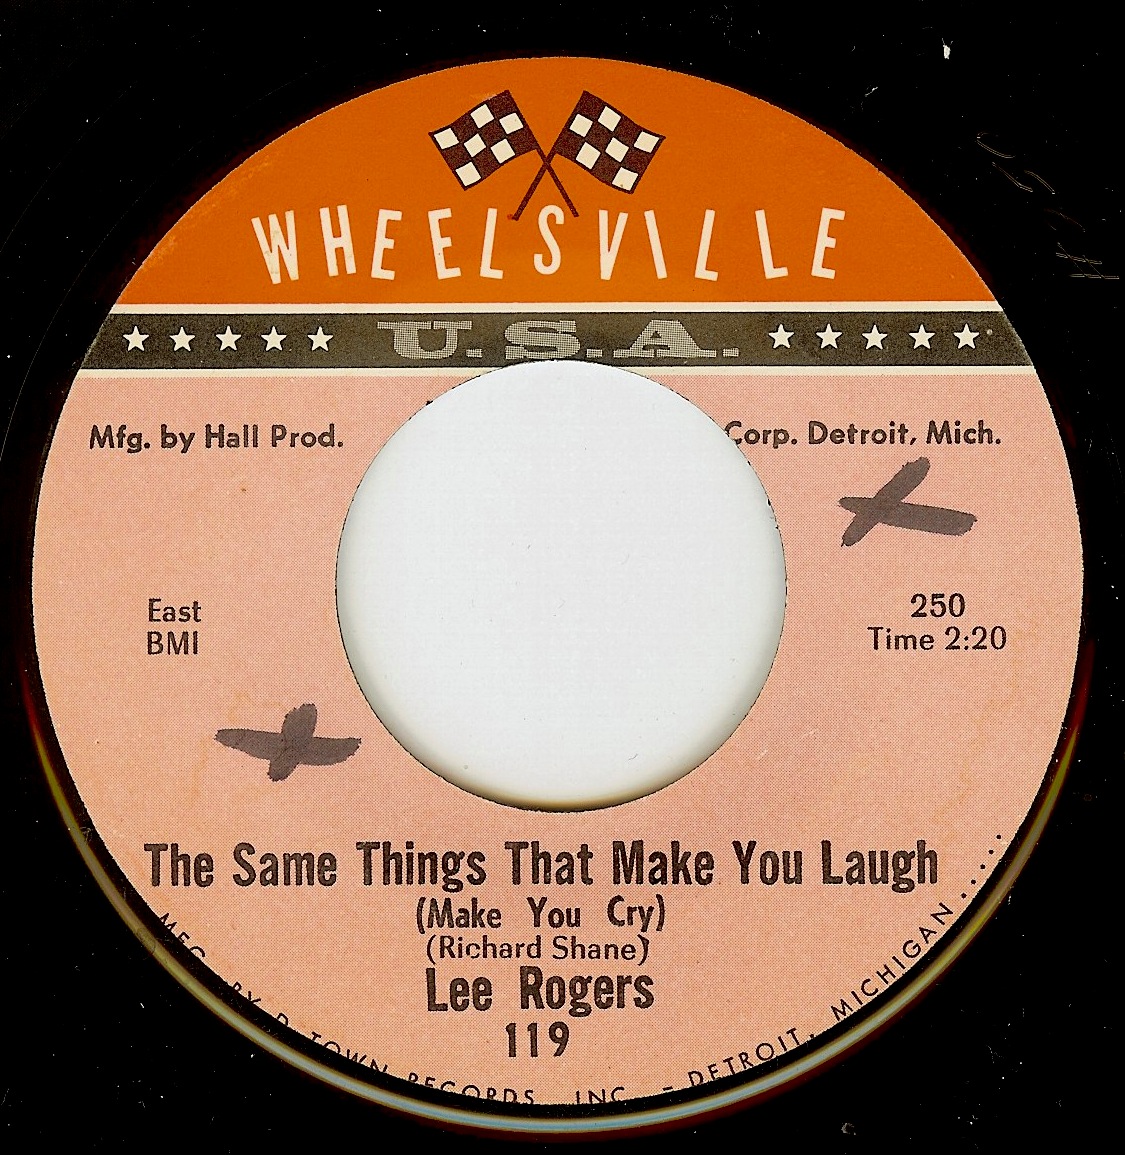 Derek's Daily 45: LEE ROGERS - THE SAME THINGS THAT MAKE YOU LAUGH